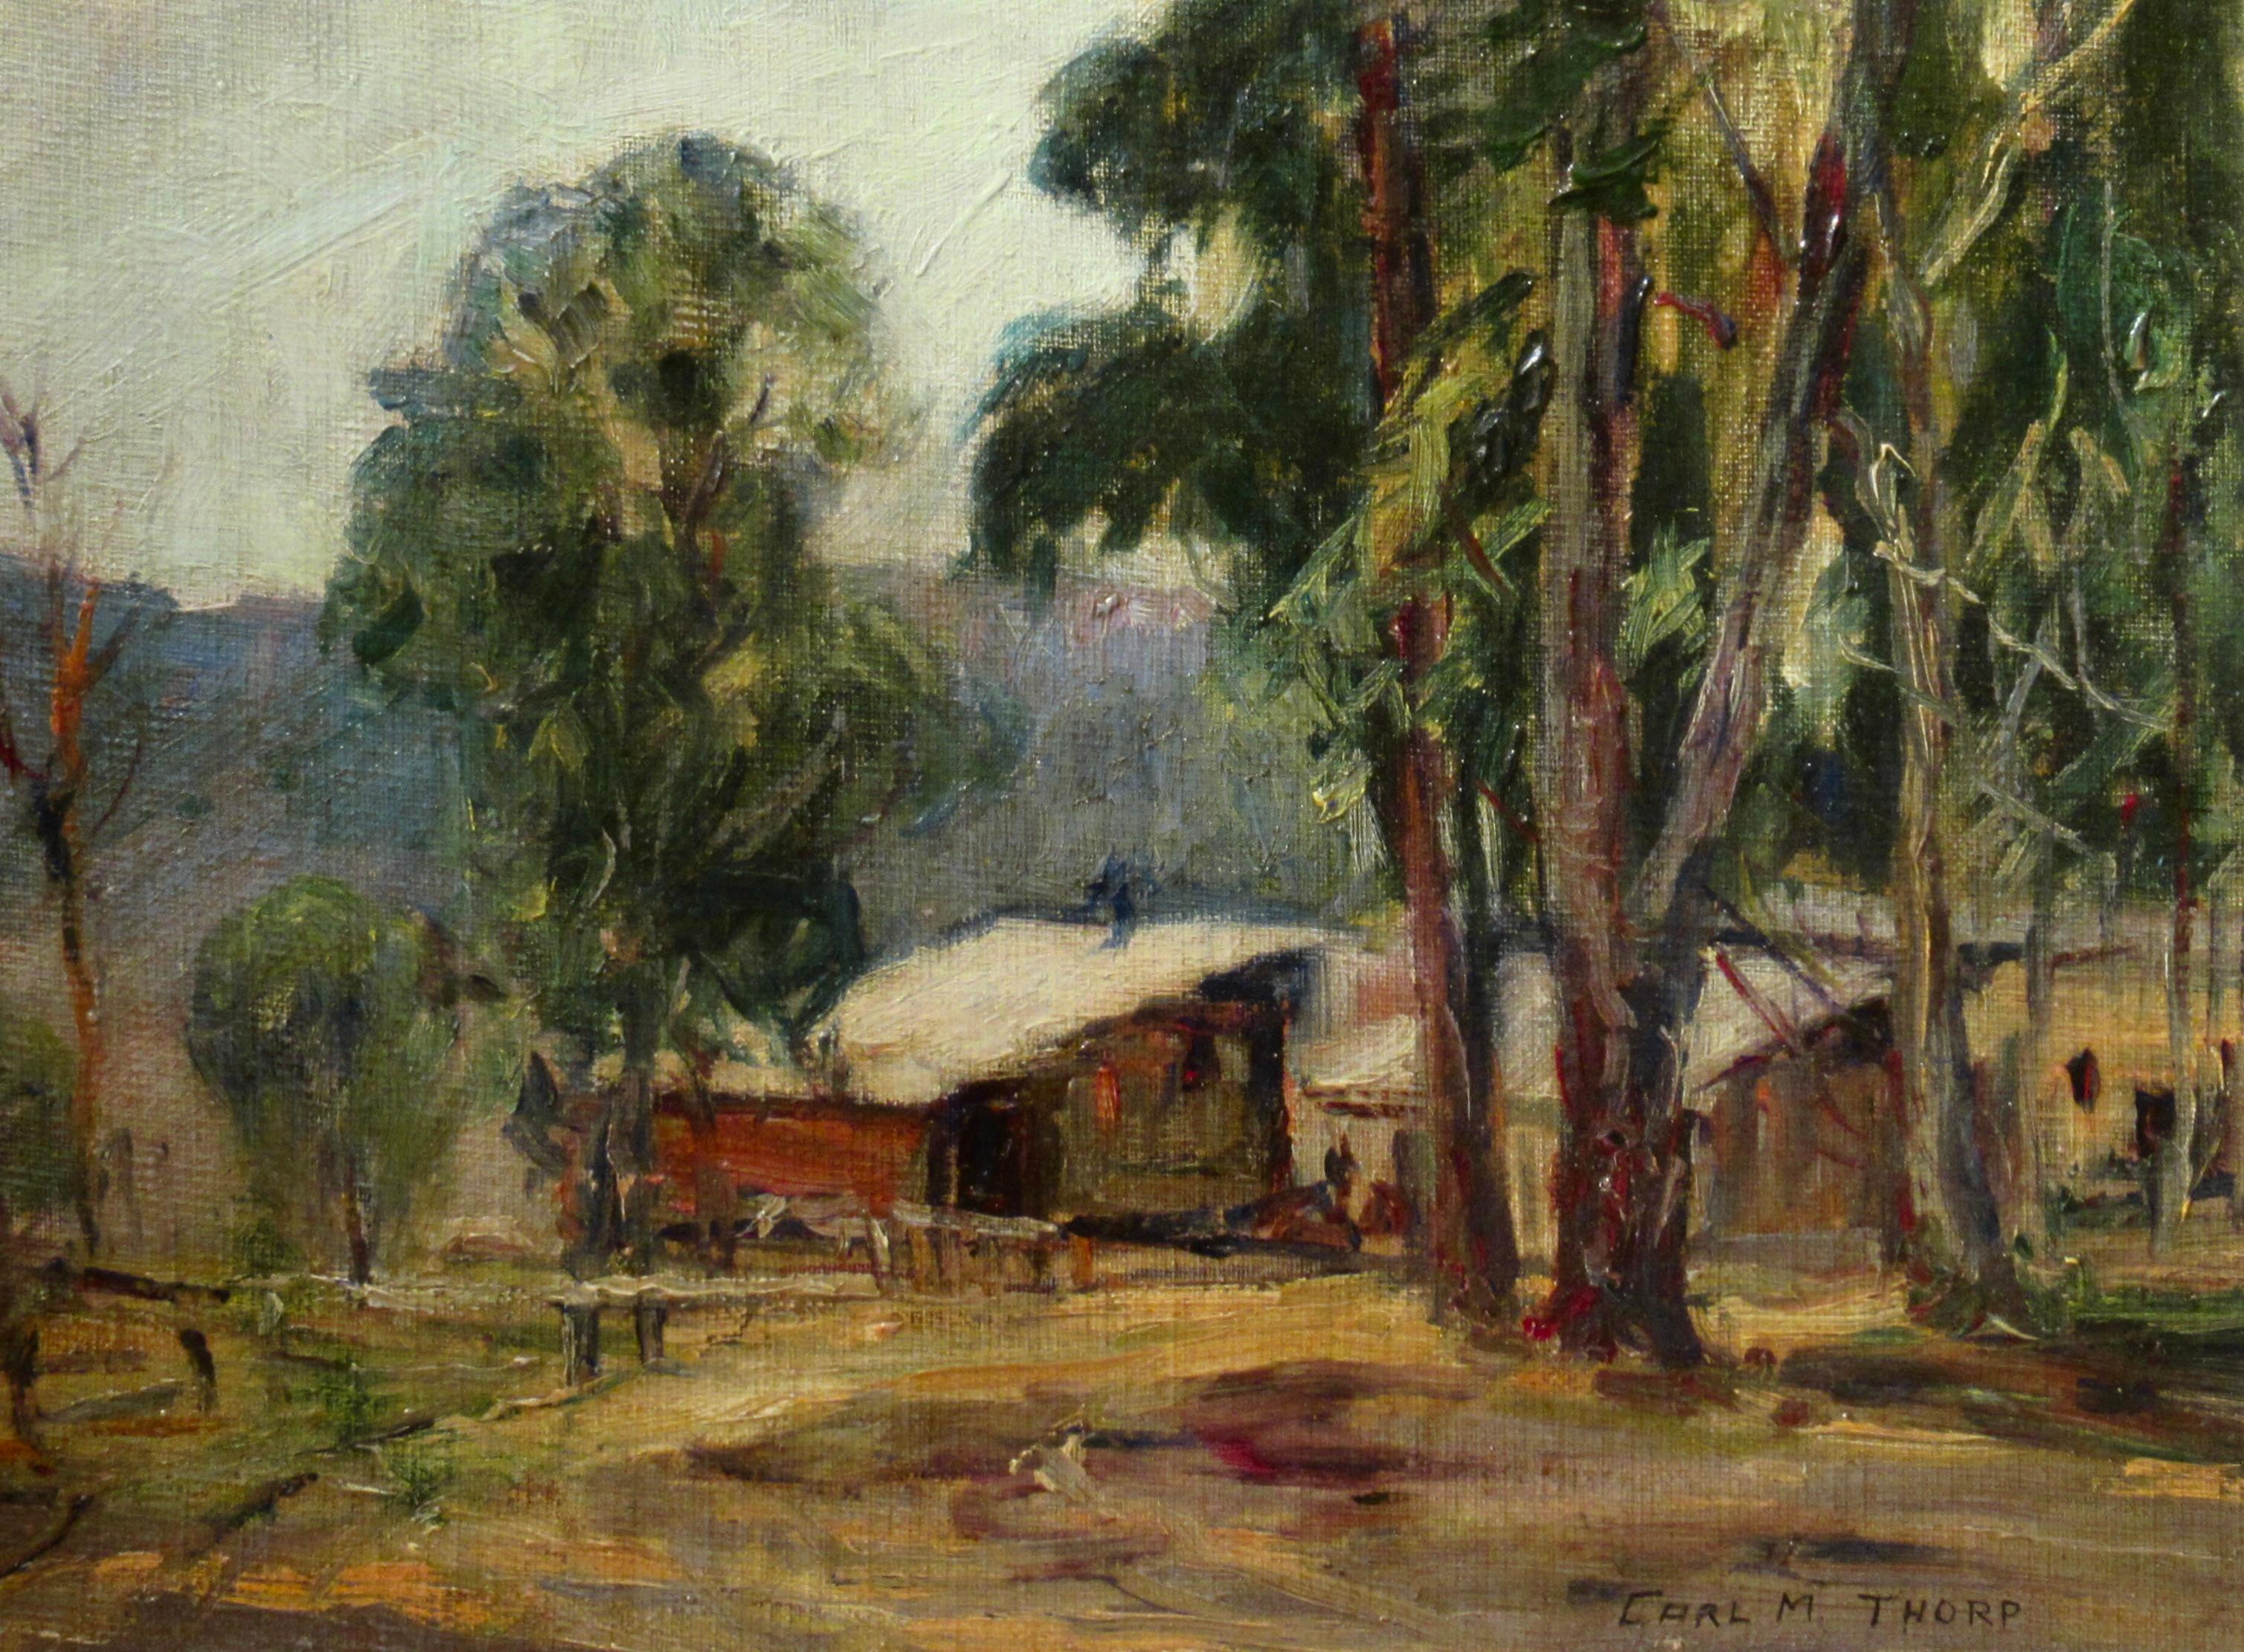 Near Modesto - Painting by Carl Thorp